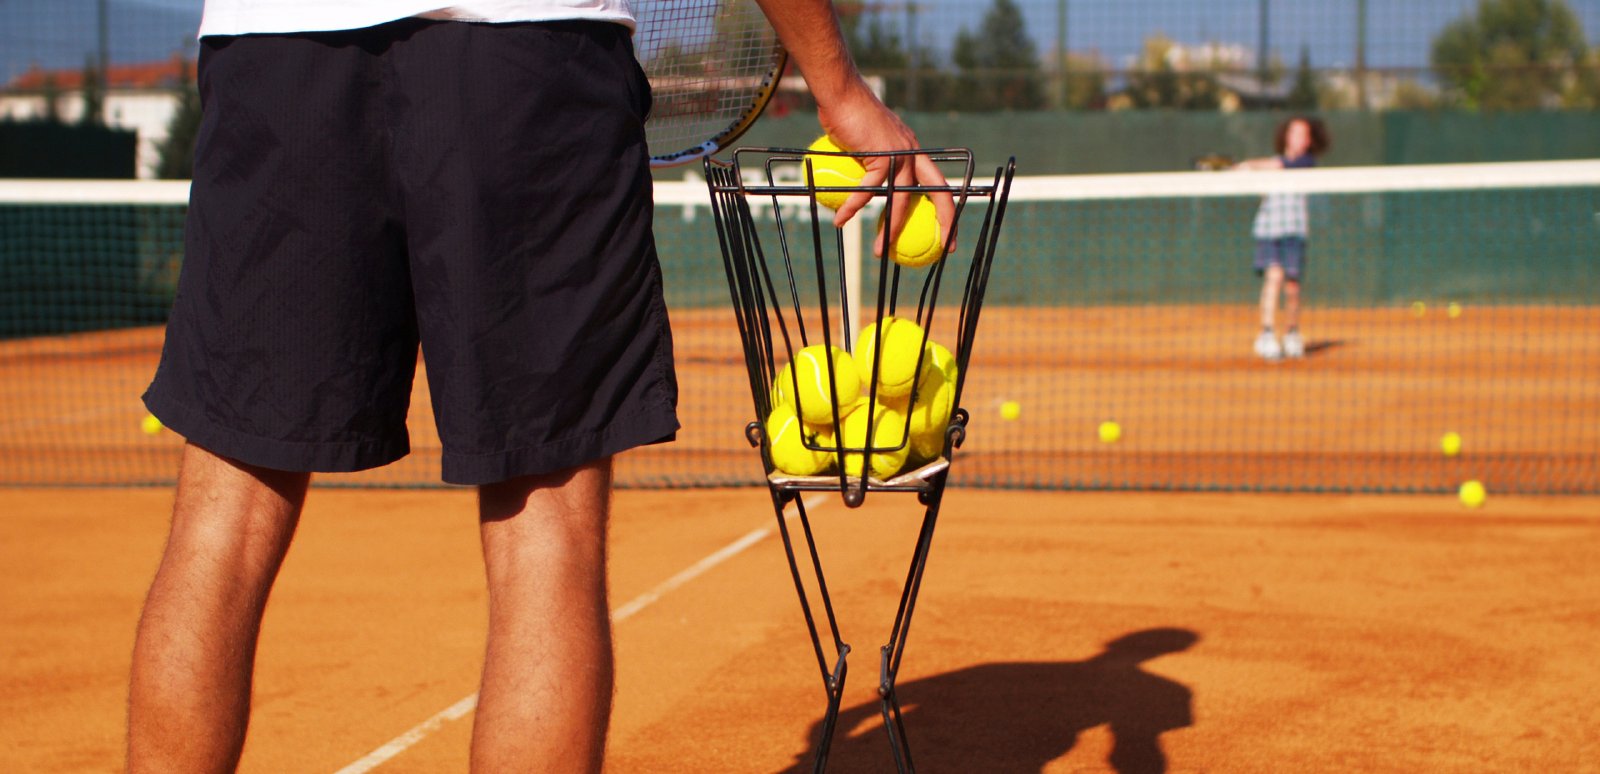 3 Ways To Find Affordable Tennis Lessons